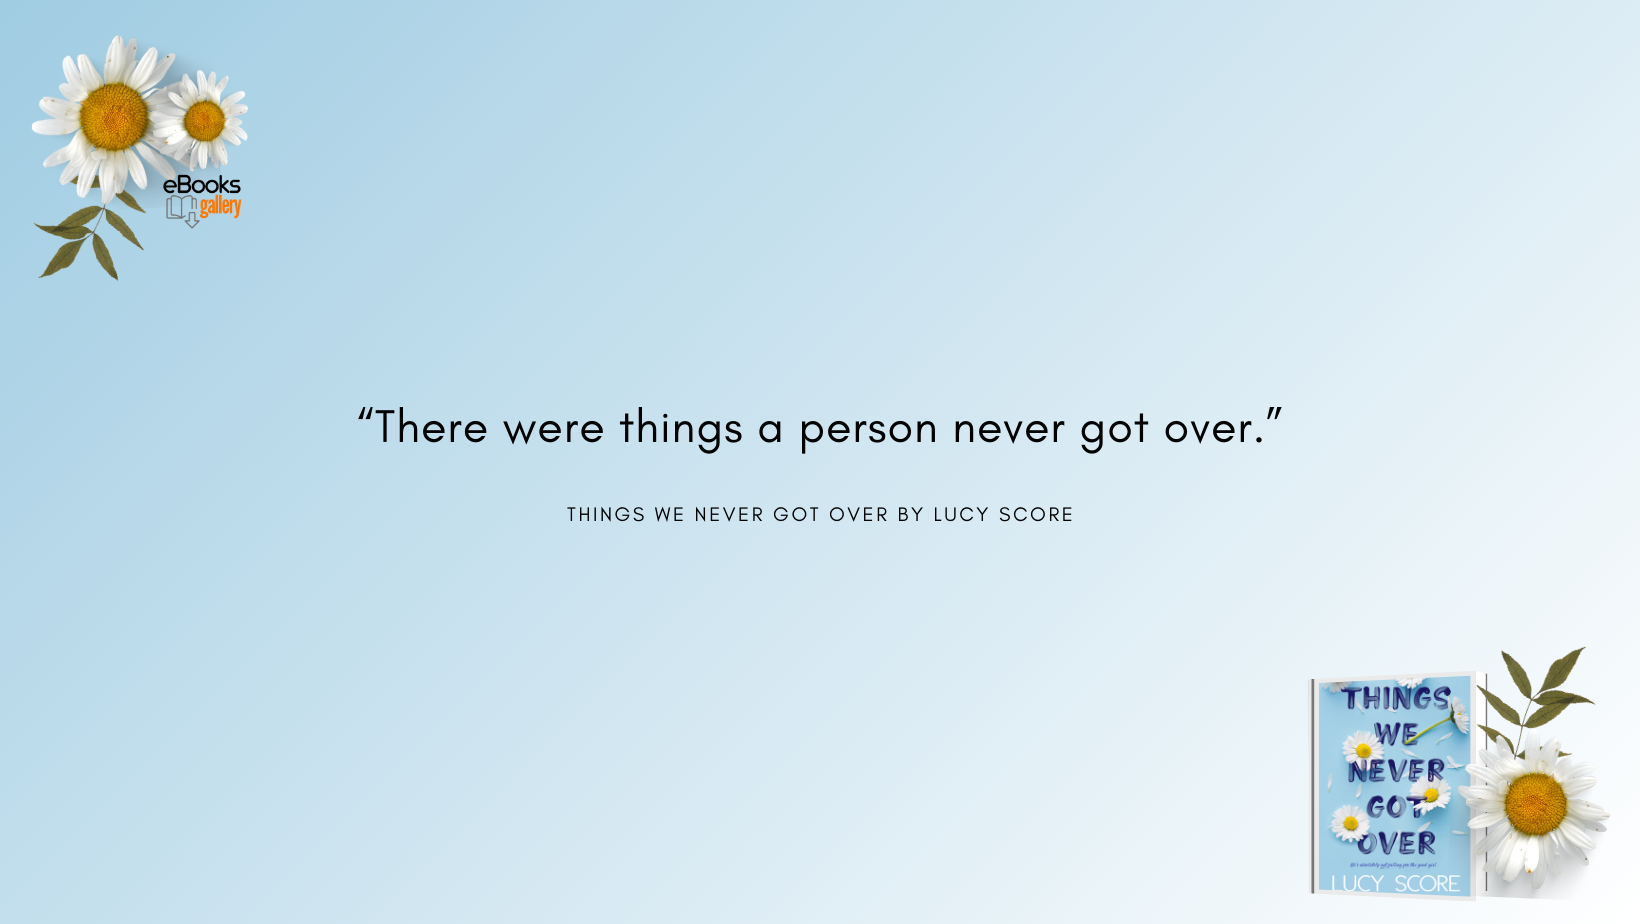 Things We never got over by Lucy Score - free download HD image high resolution wallpaper quotation for desktop, mobile, tablet or laptop - ebooksgallery.com